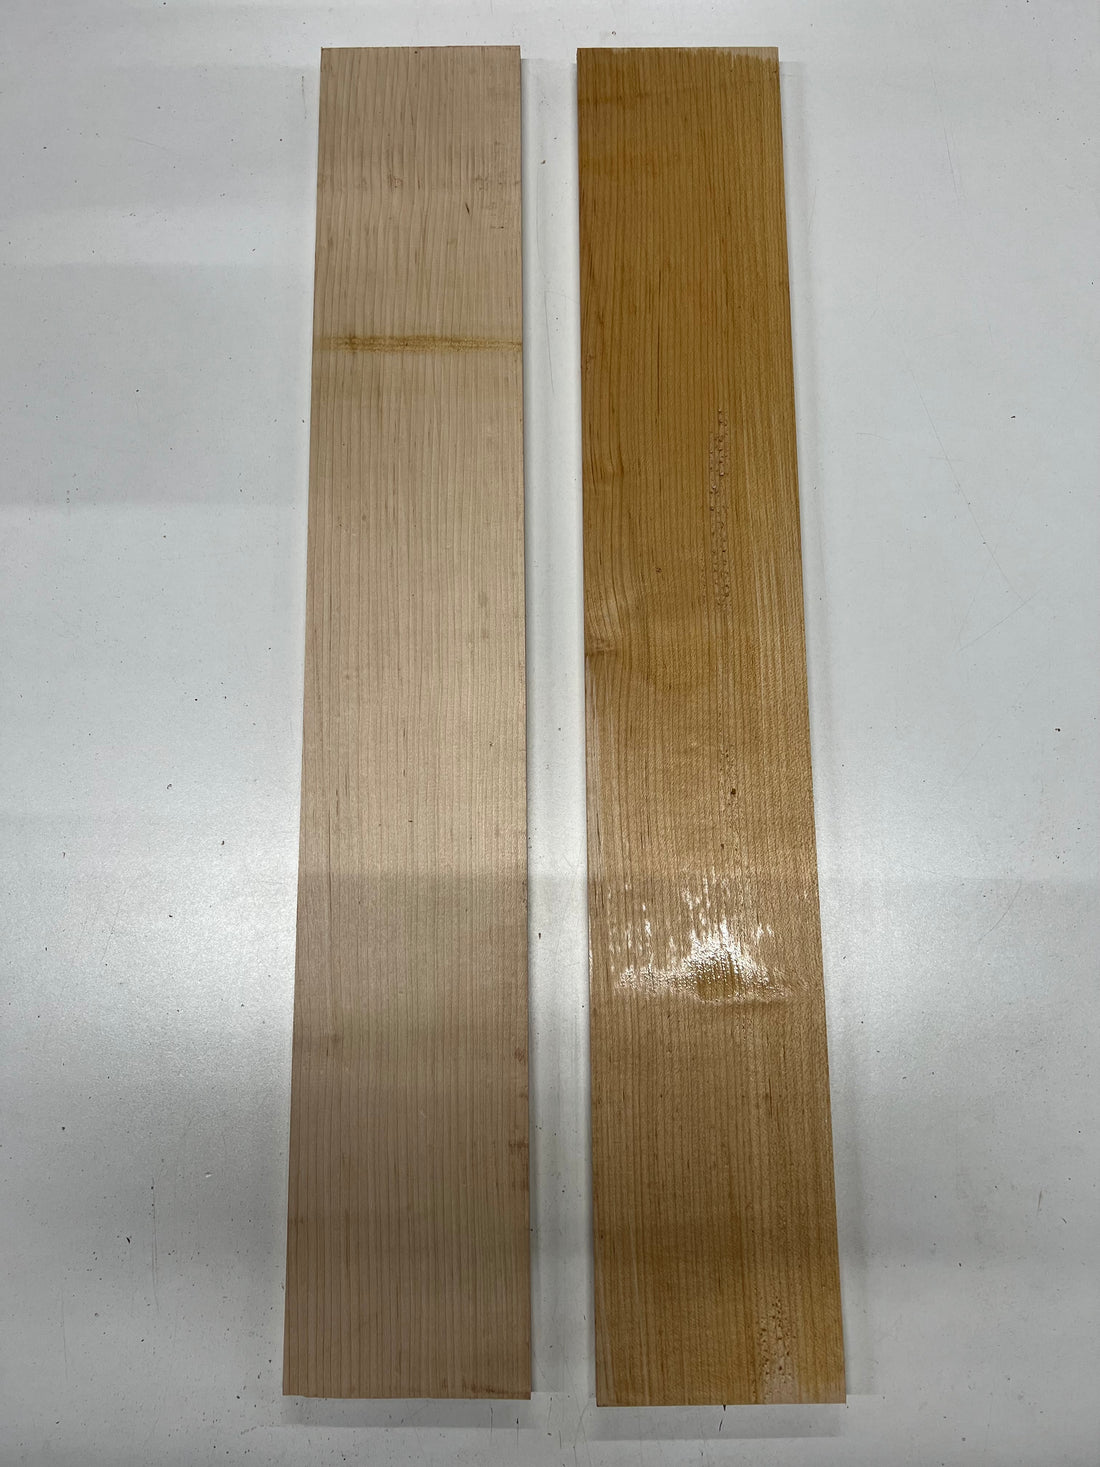 Pack Of 2, Hard Maple Thin Stock Three Dimensional Lumber Wood Blank 28&quot;x4-1/2&quot;x1/2&quot; 